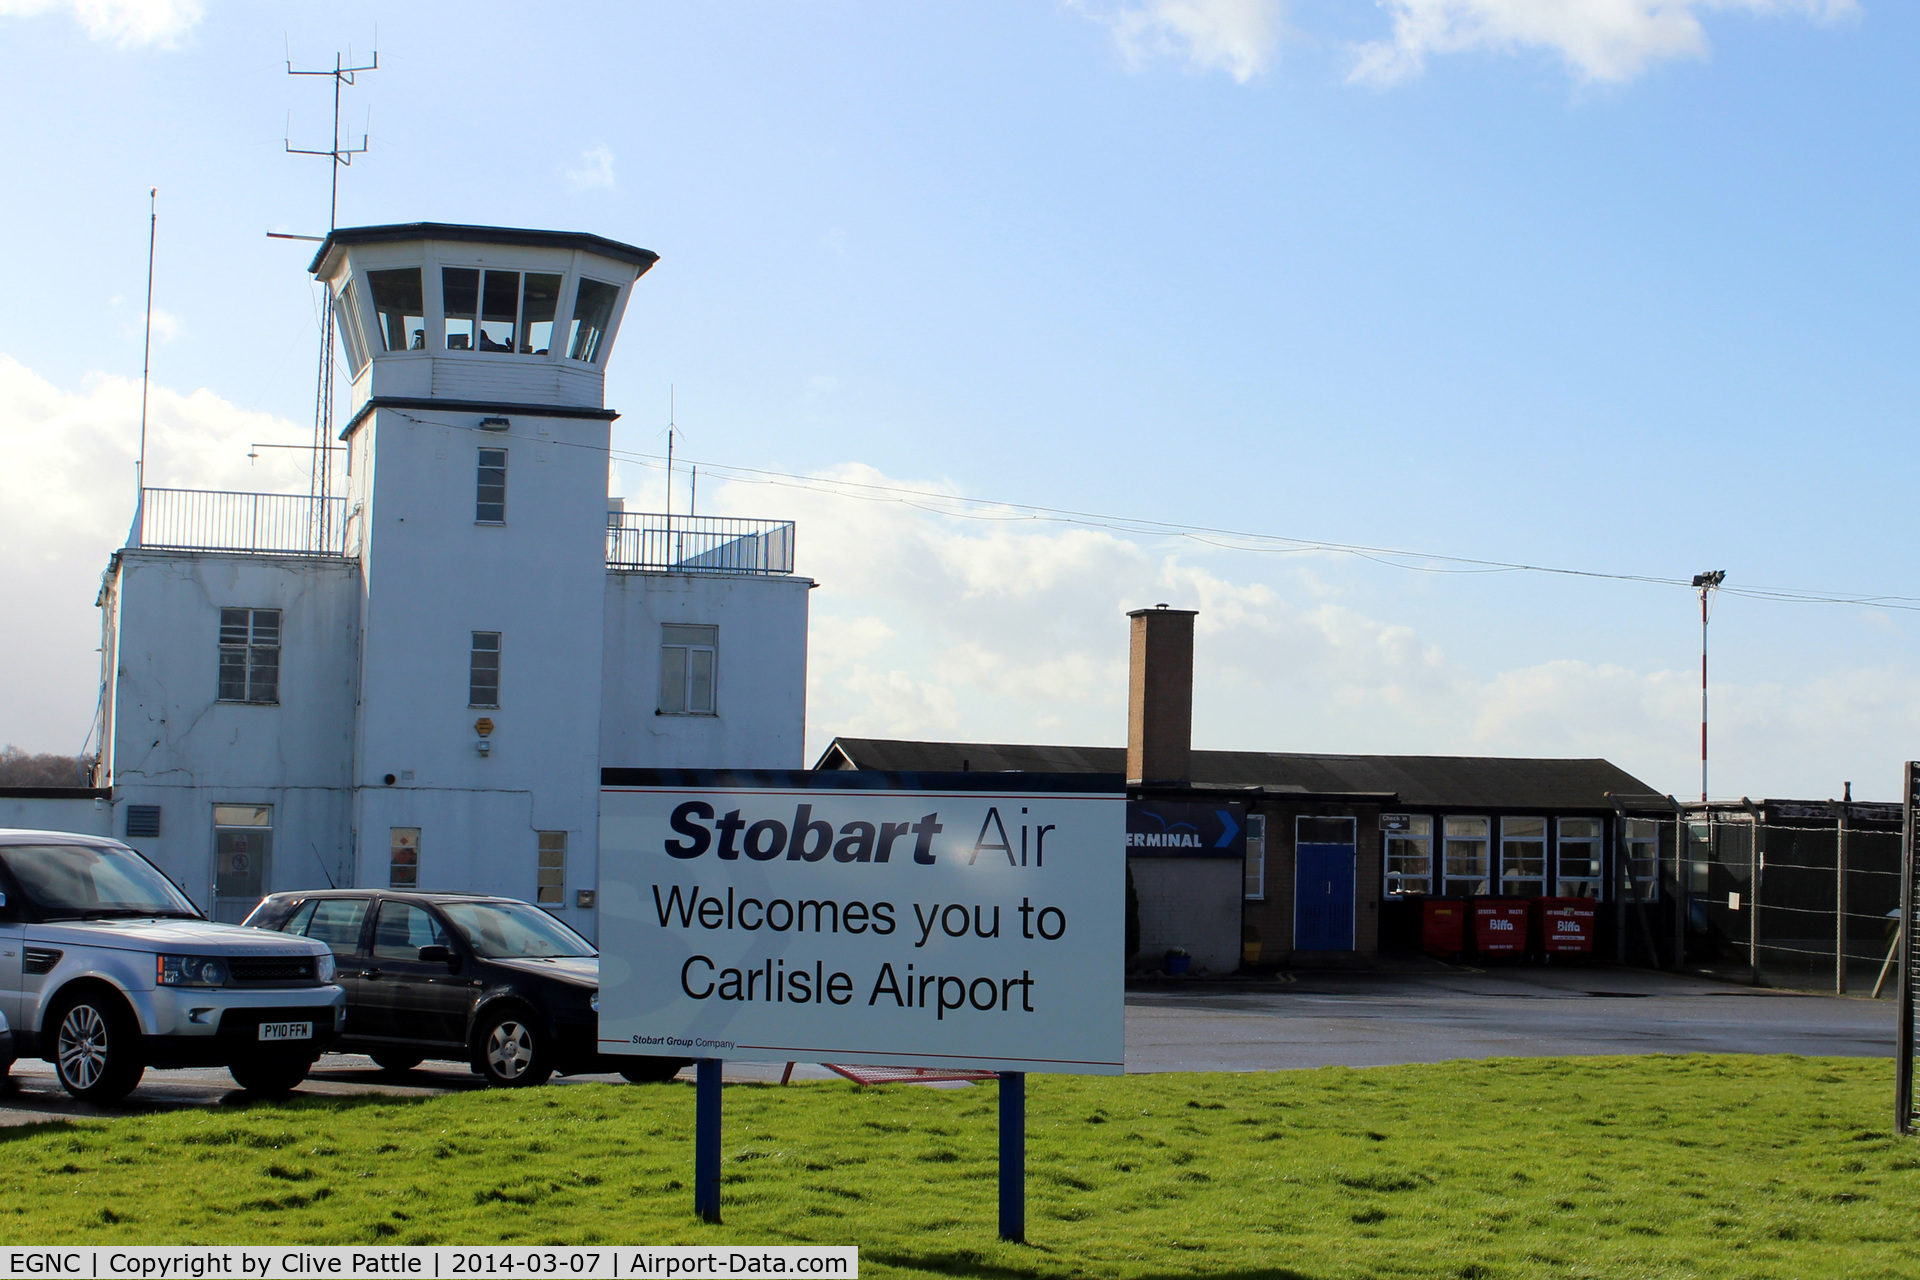 Carlisle Airport, Carlisle, England United Kingdom (EGNC) - Tower view - you can get some lovely grub in the cafe on the ground floor !